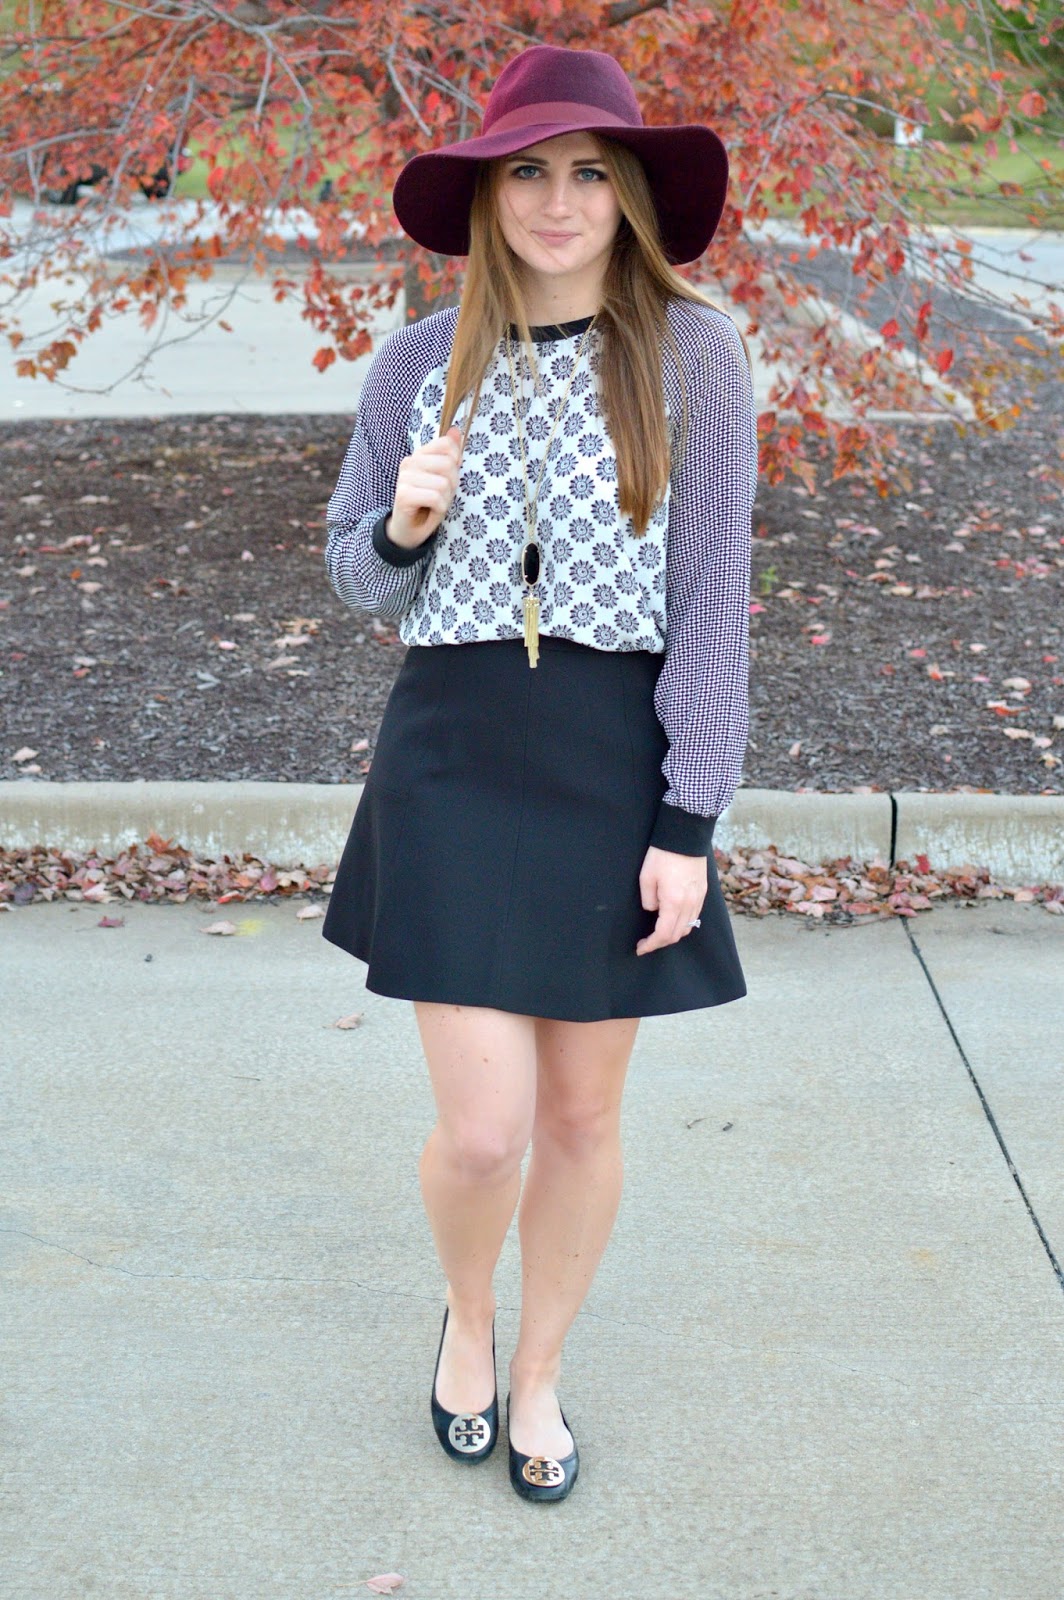 printed black and white top with a black skirt